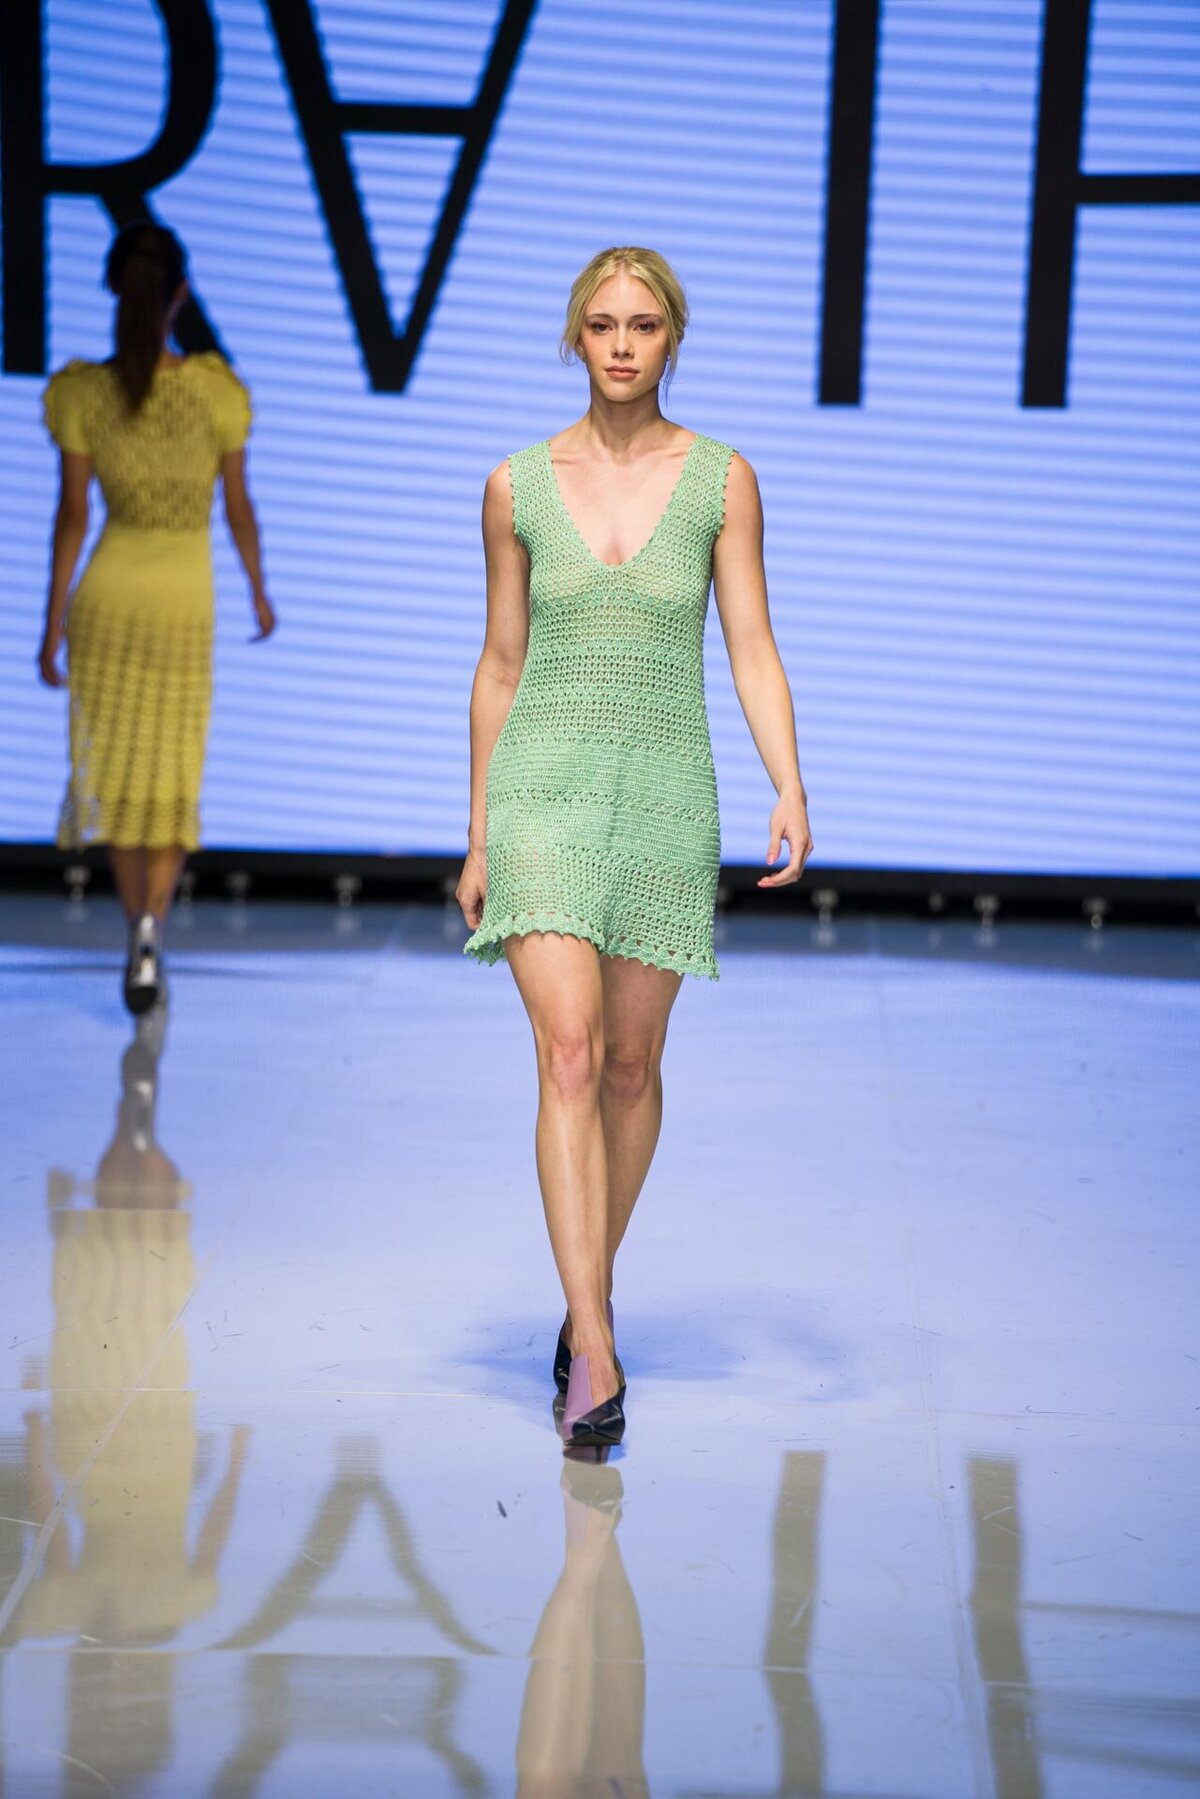 2021-10-09 - LAFW2021 - Laura Theiss - @dericmillerphoto-09763